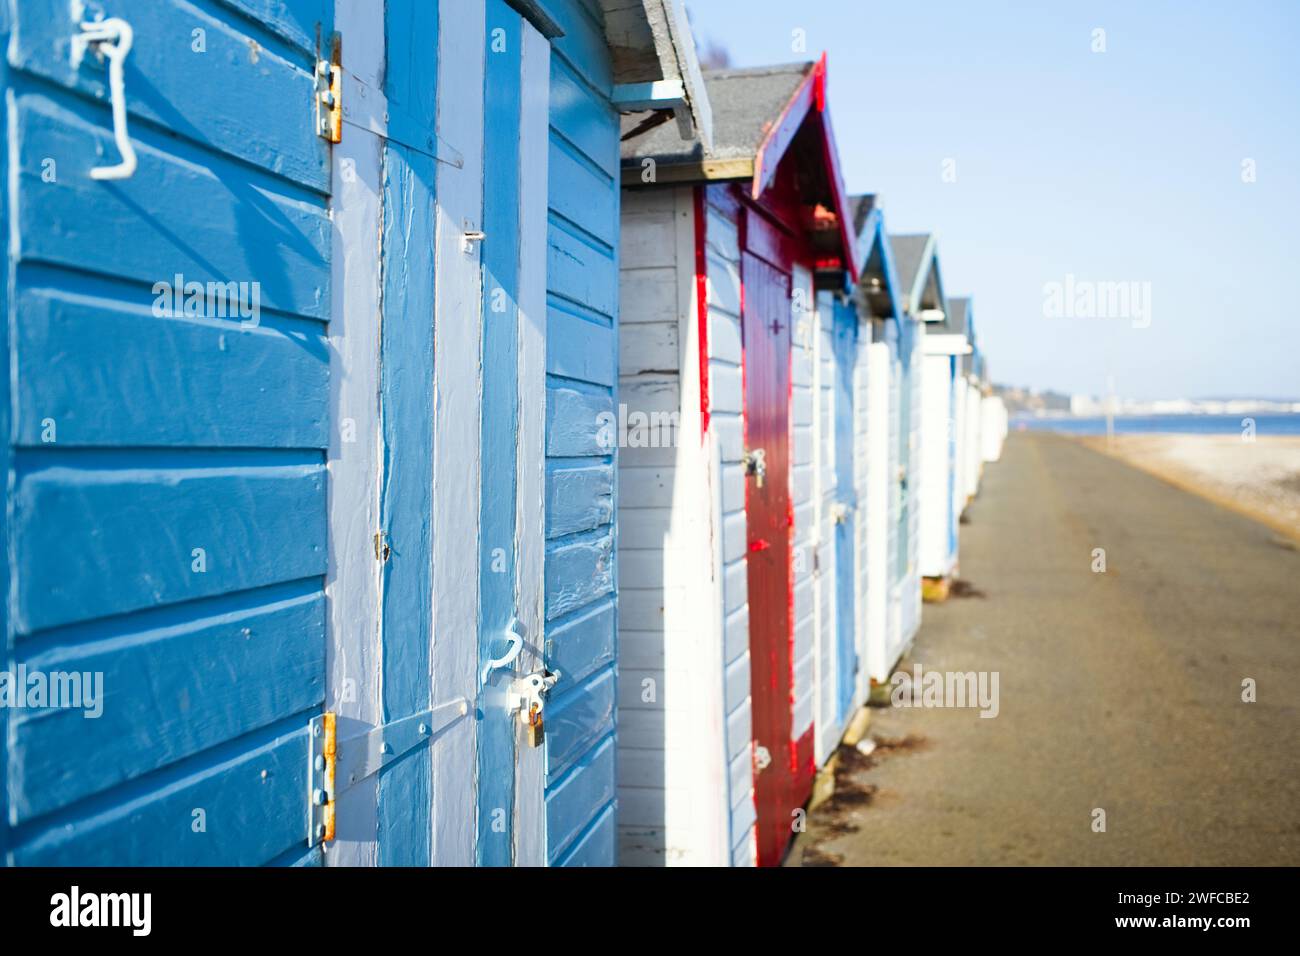 Beach huts at Shanklin, Isle of Wight with shallow depth of field Stock Photo